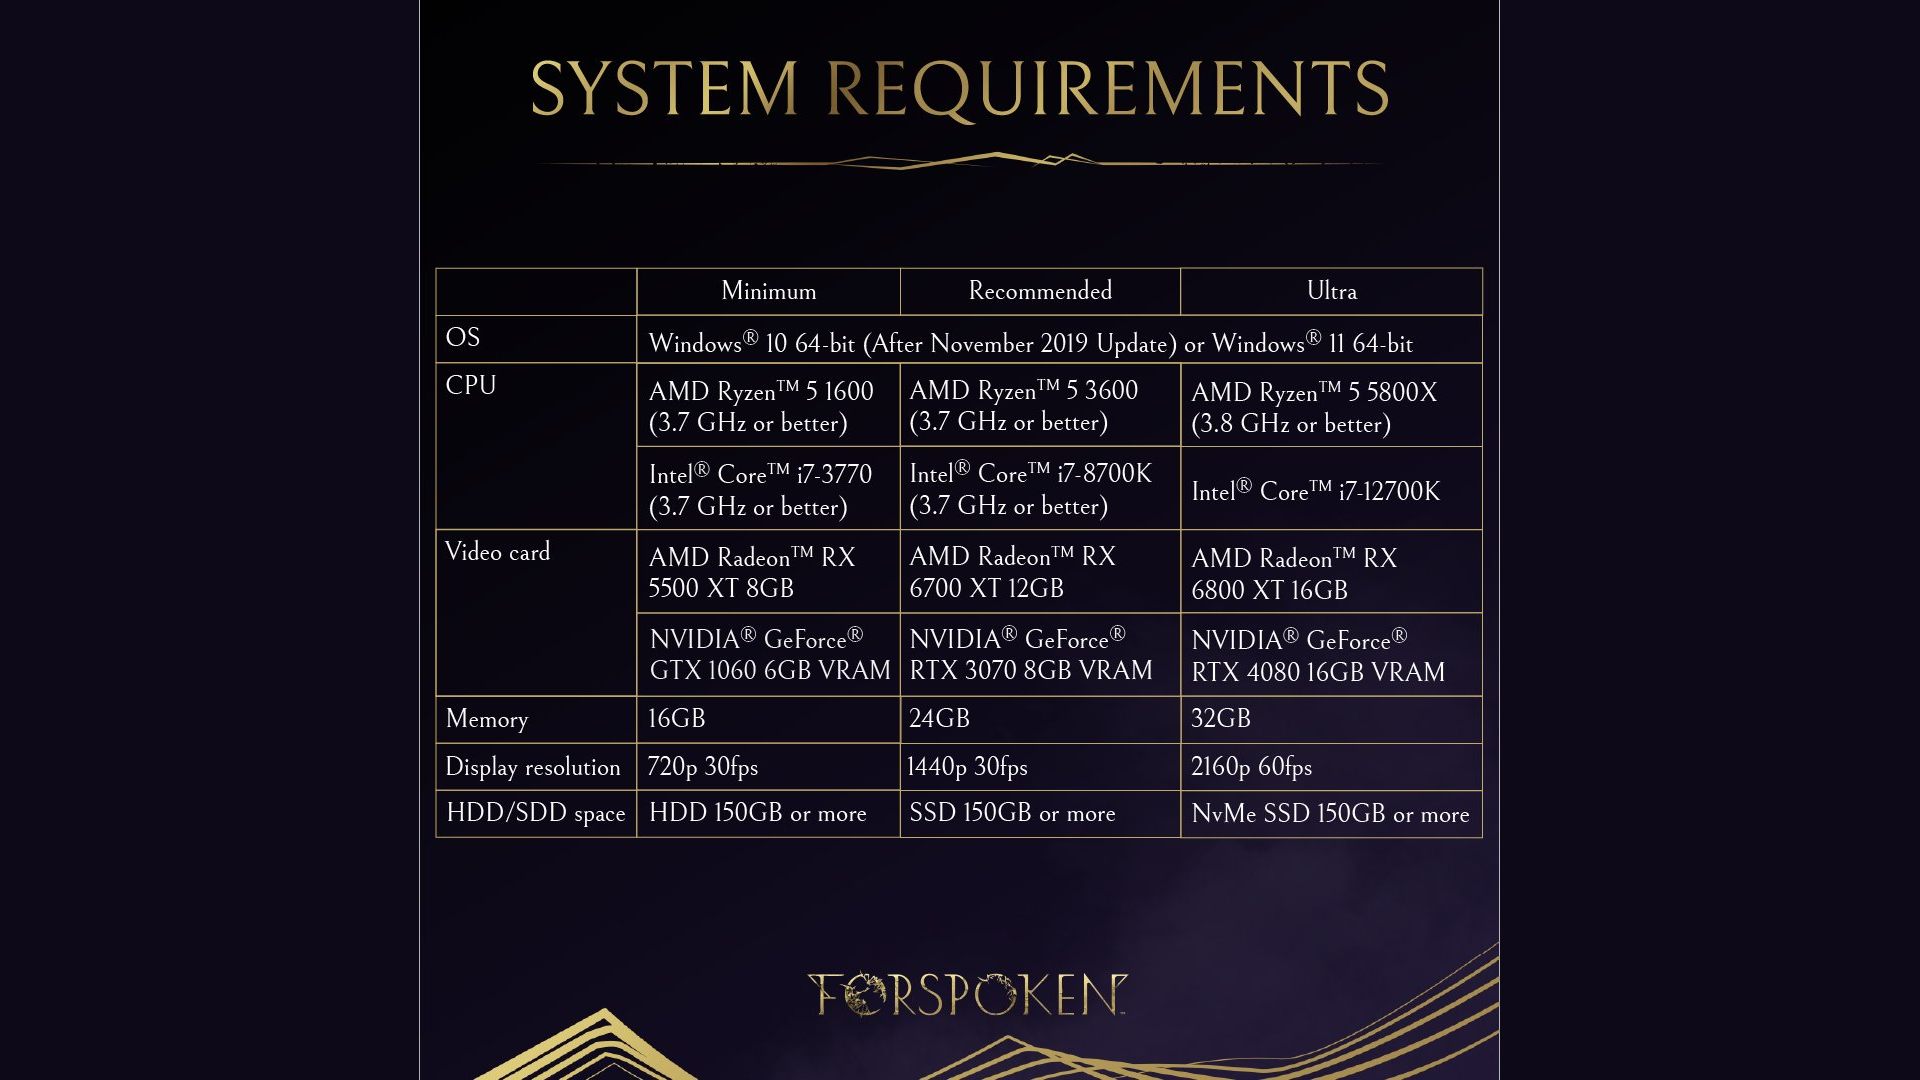 Forspoken PC specs list with recommendations and performanc expectations